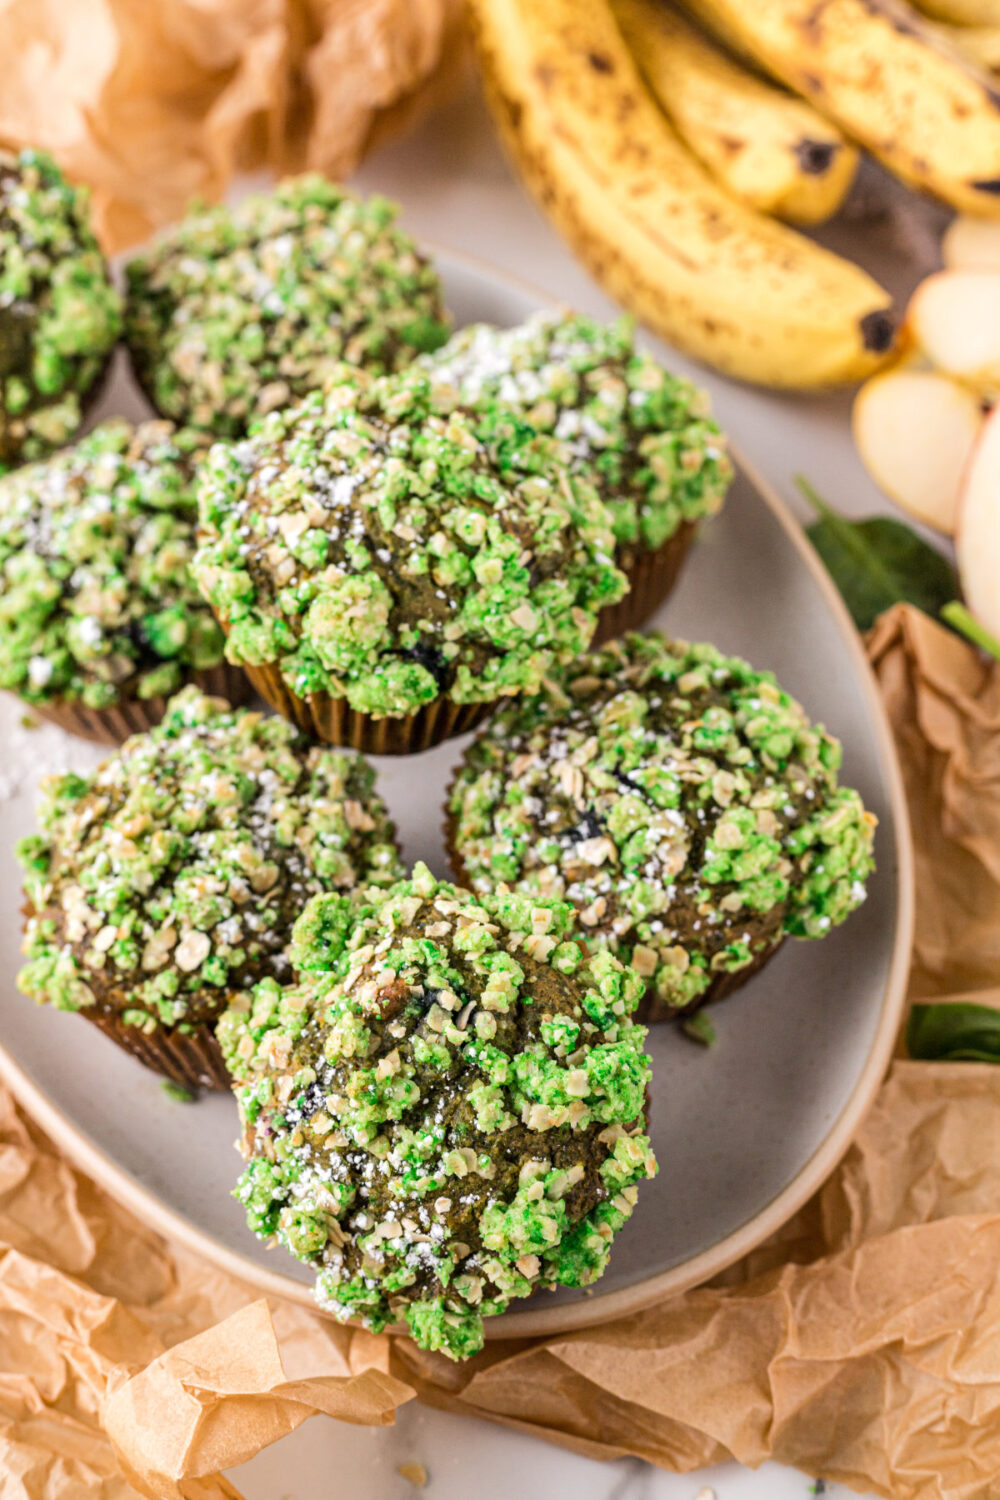 Green muffins stacked on a tray next to bananas.